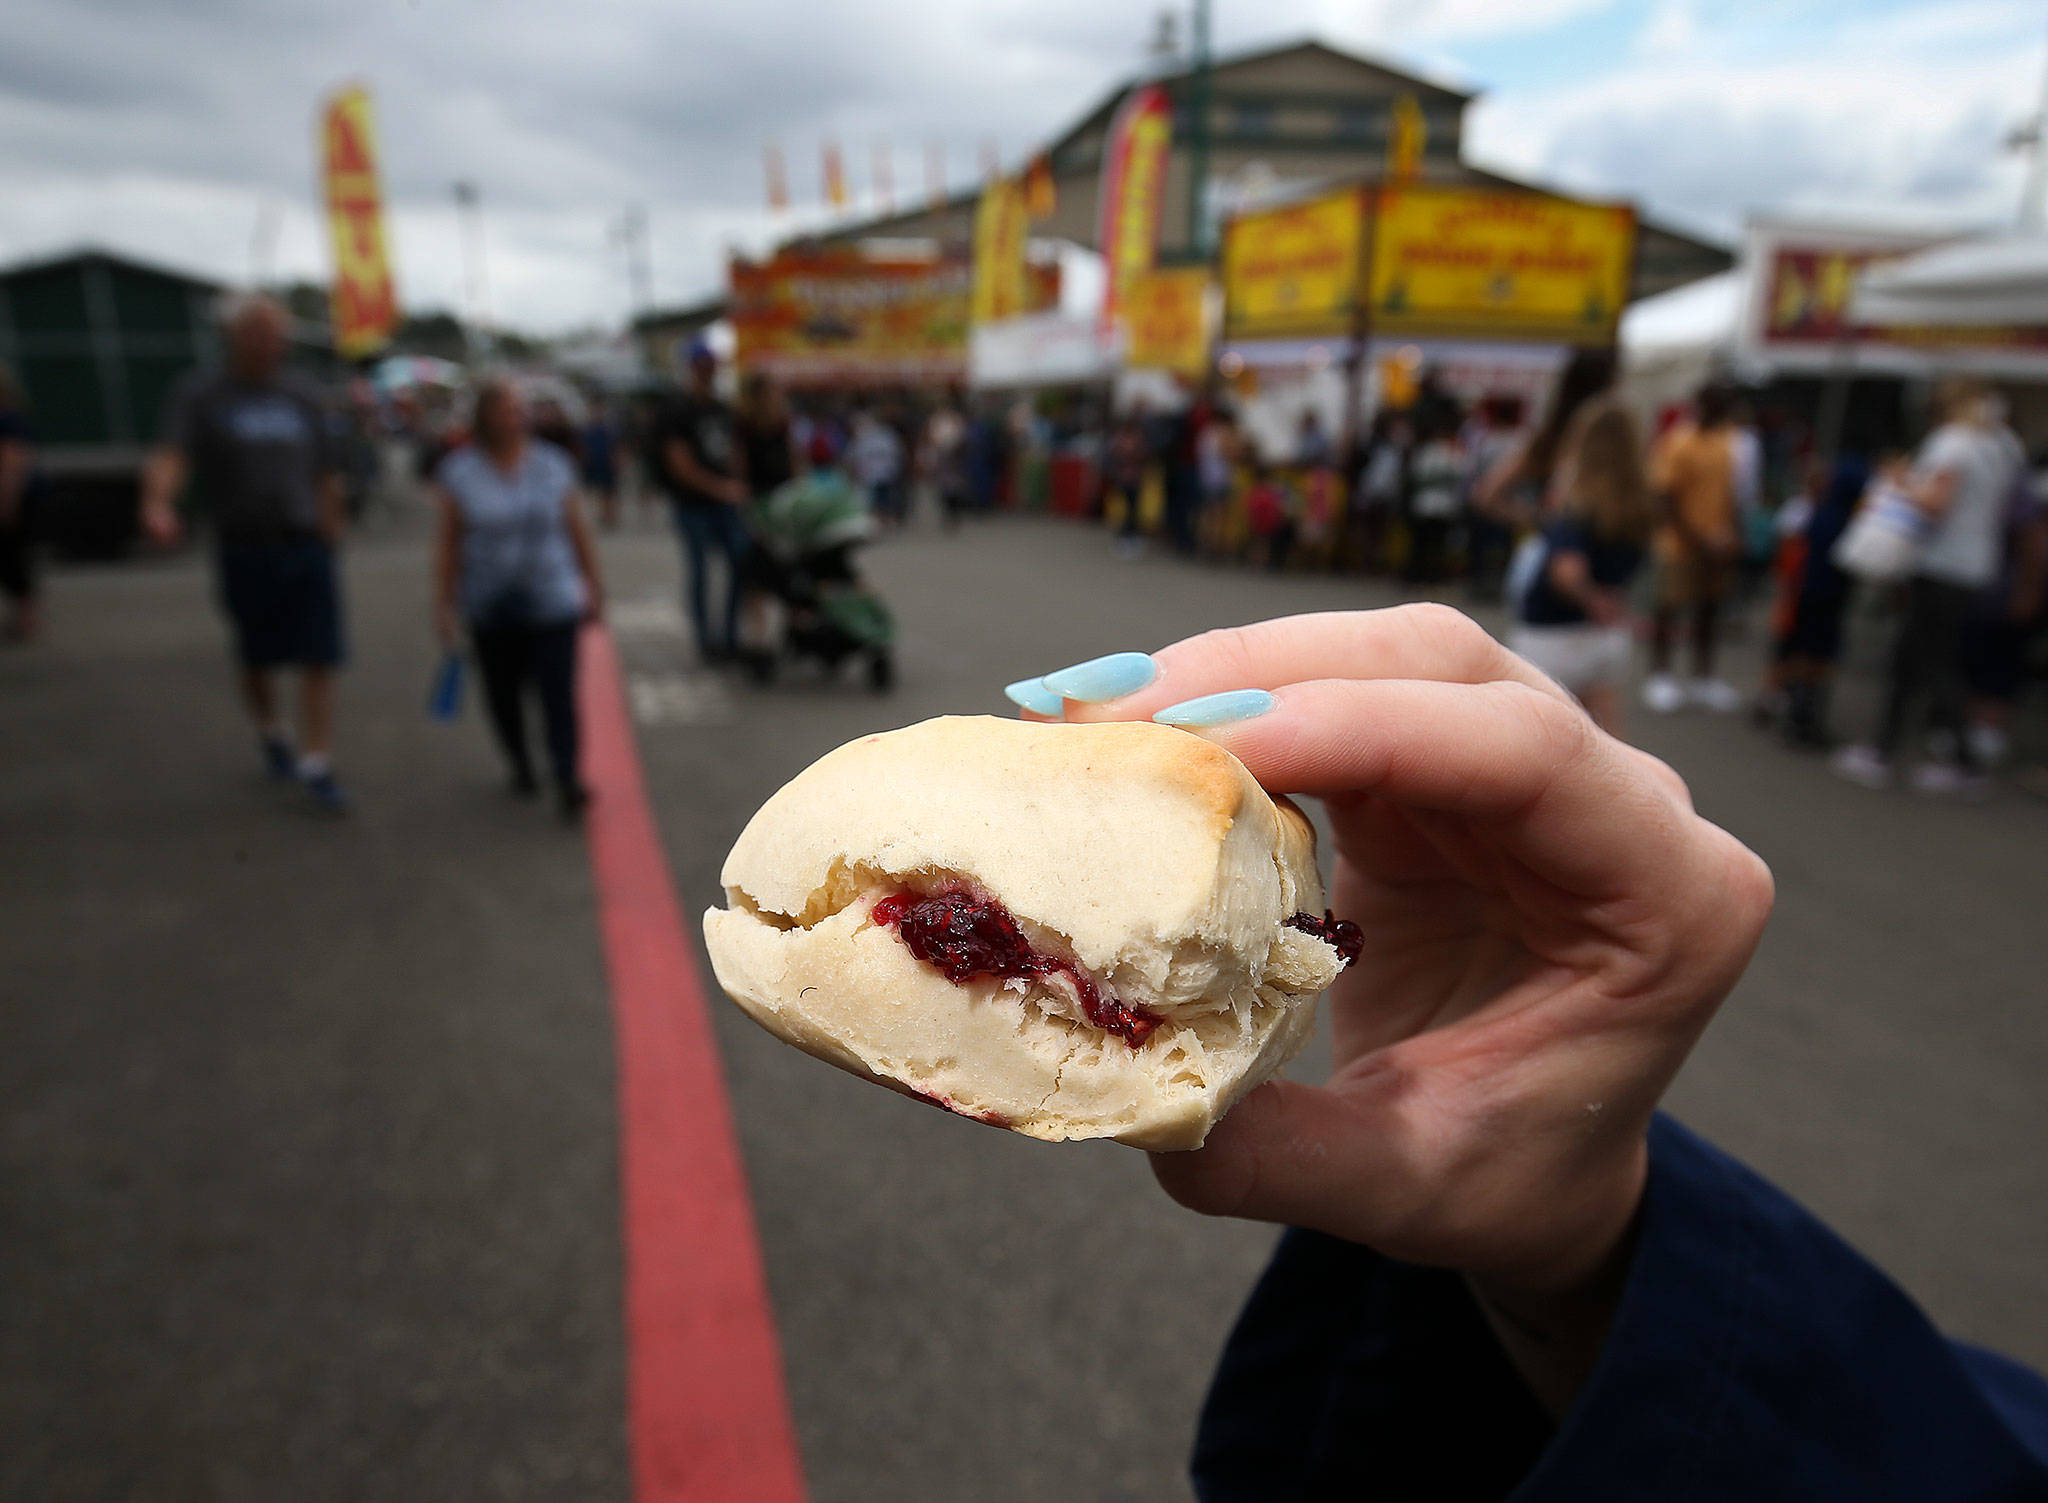 A fairgoer gets ready to bite into a Fisher Fair Scone on opening day of the Evergreen State Fair on Aug. 22. (Andy Bronson / The Herald)